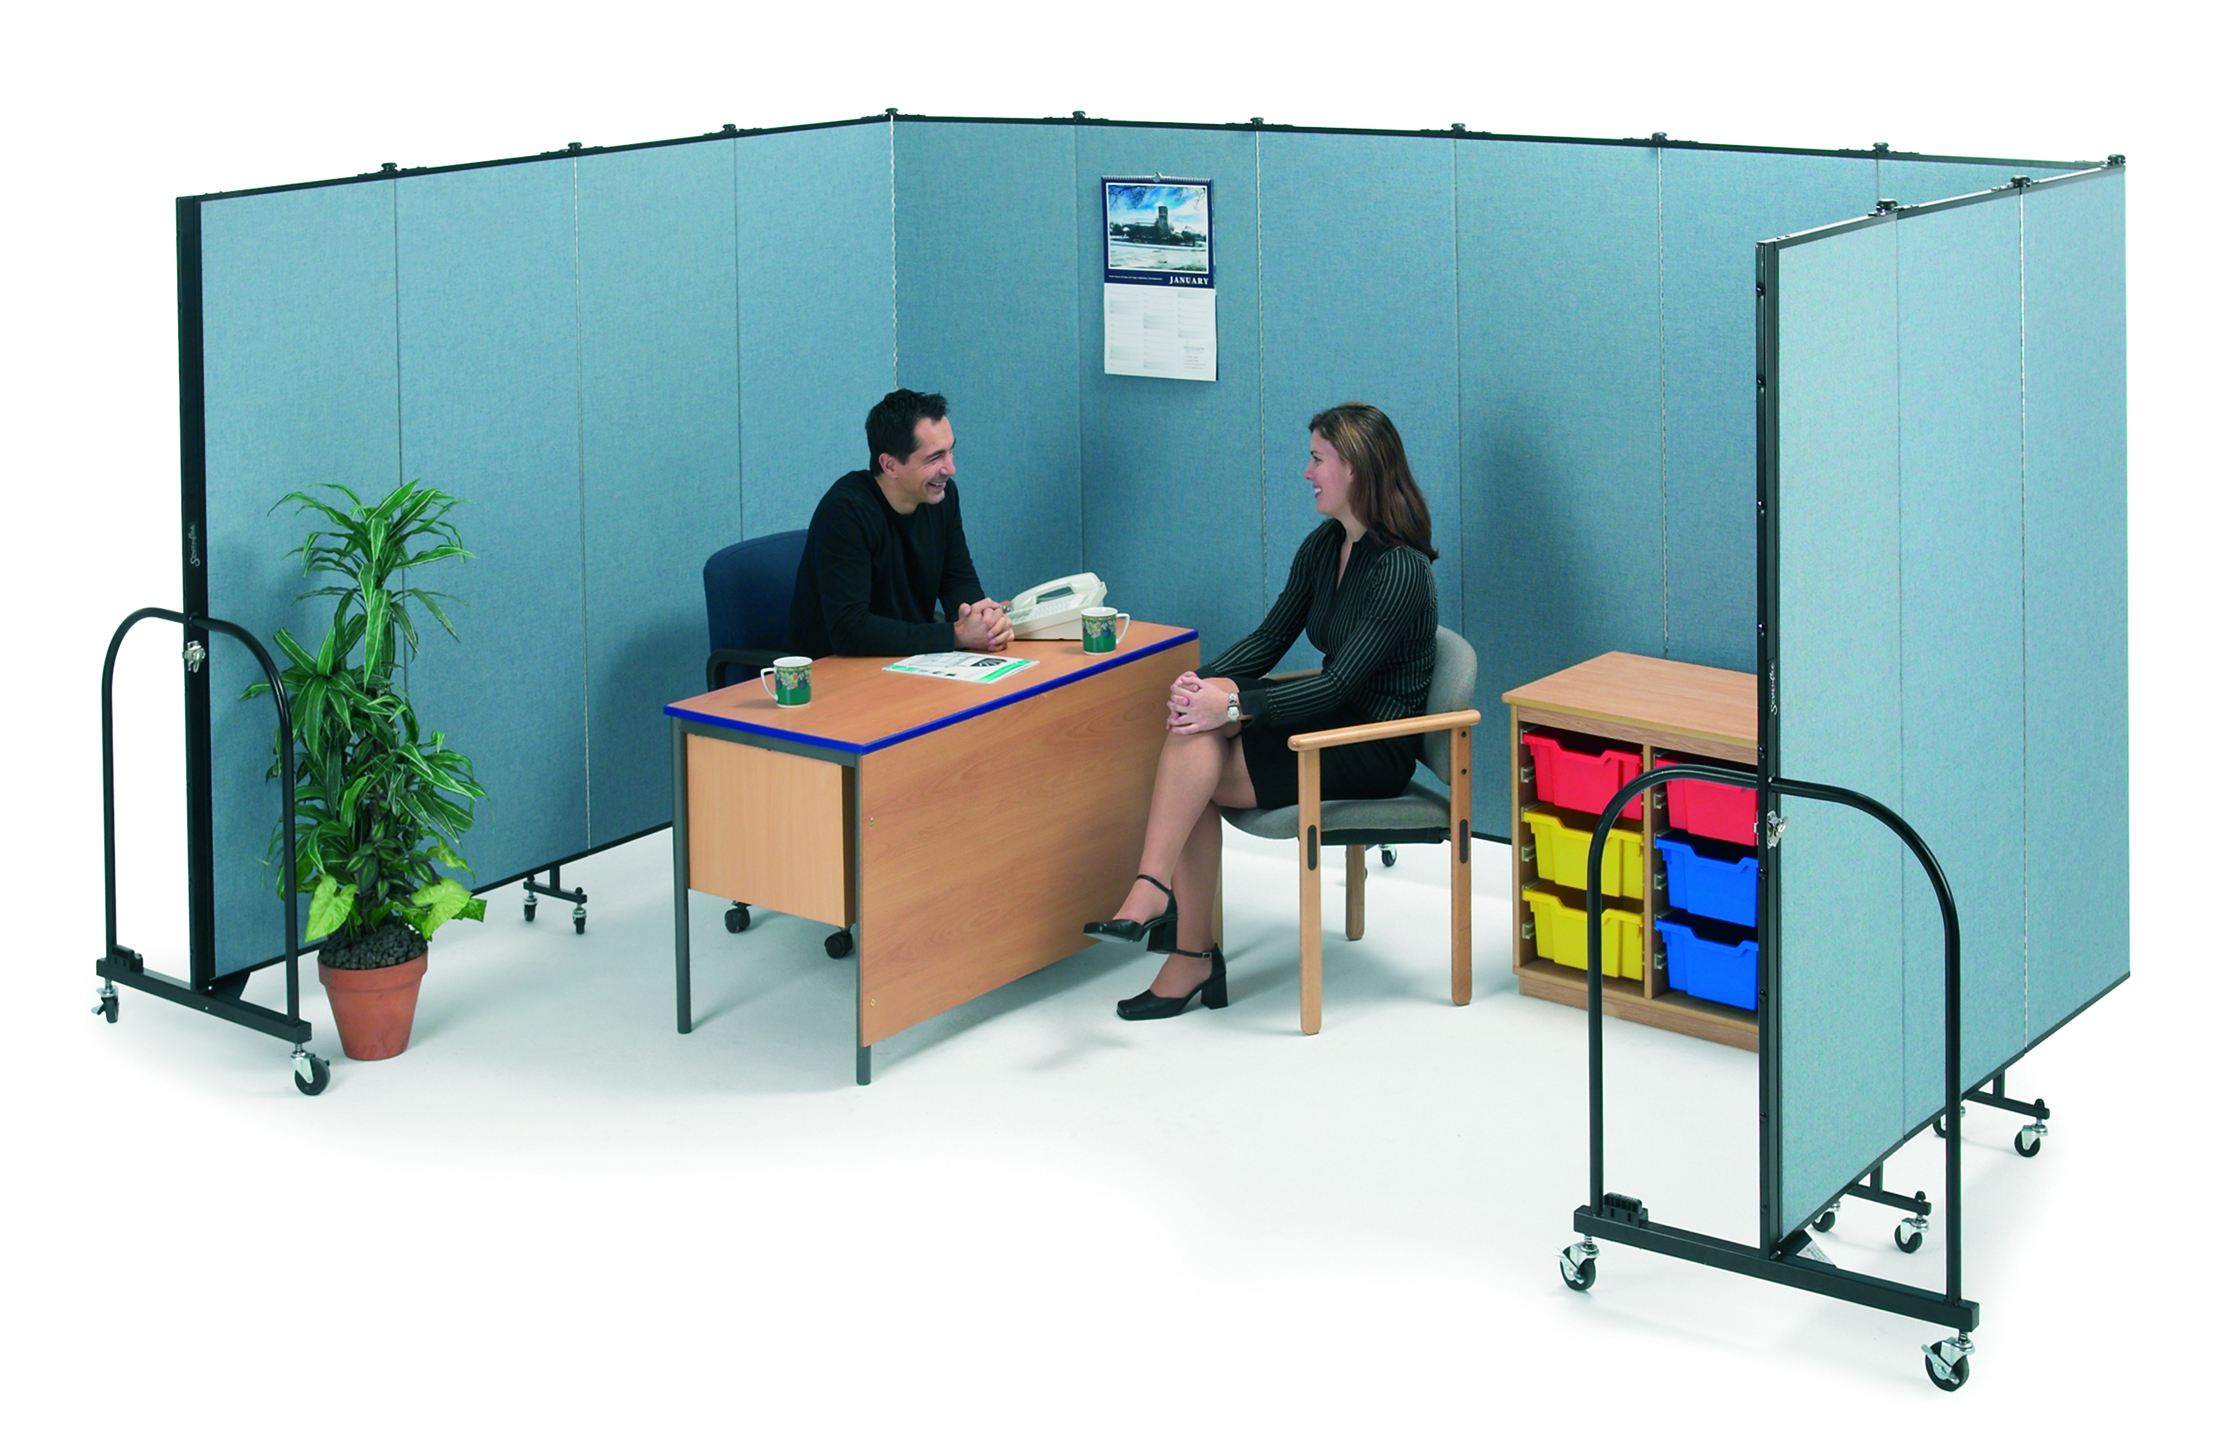 Colleagues sitting at a desk talking behind a screenflex Portable Partition